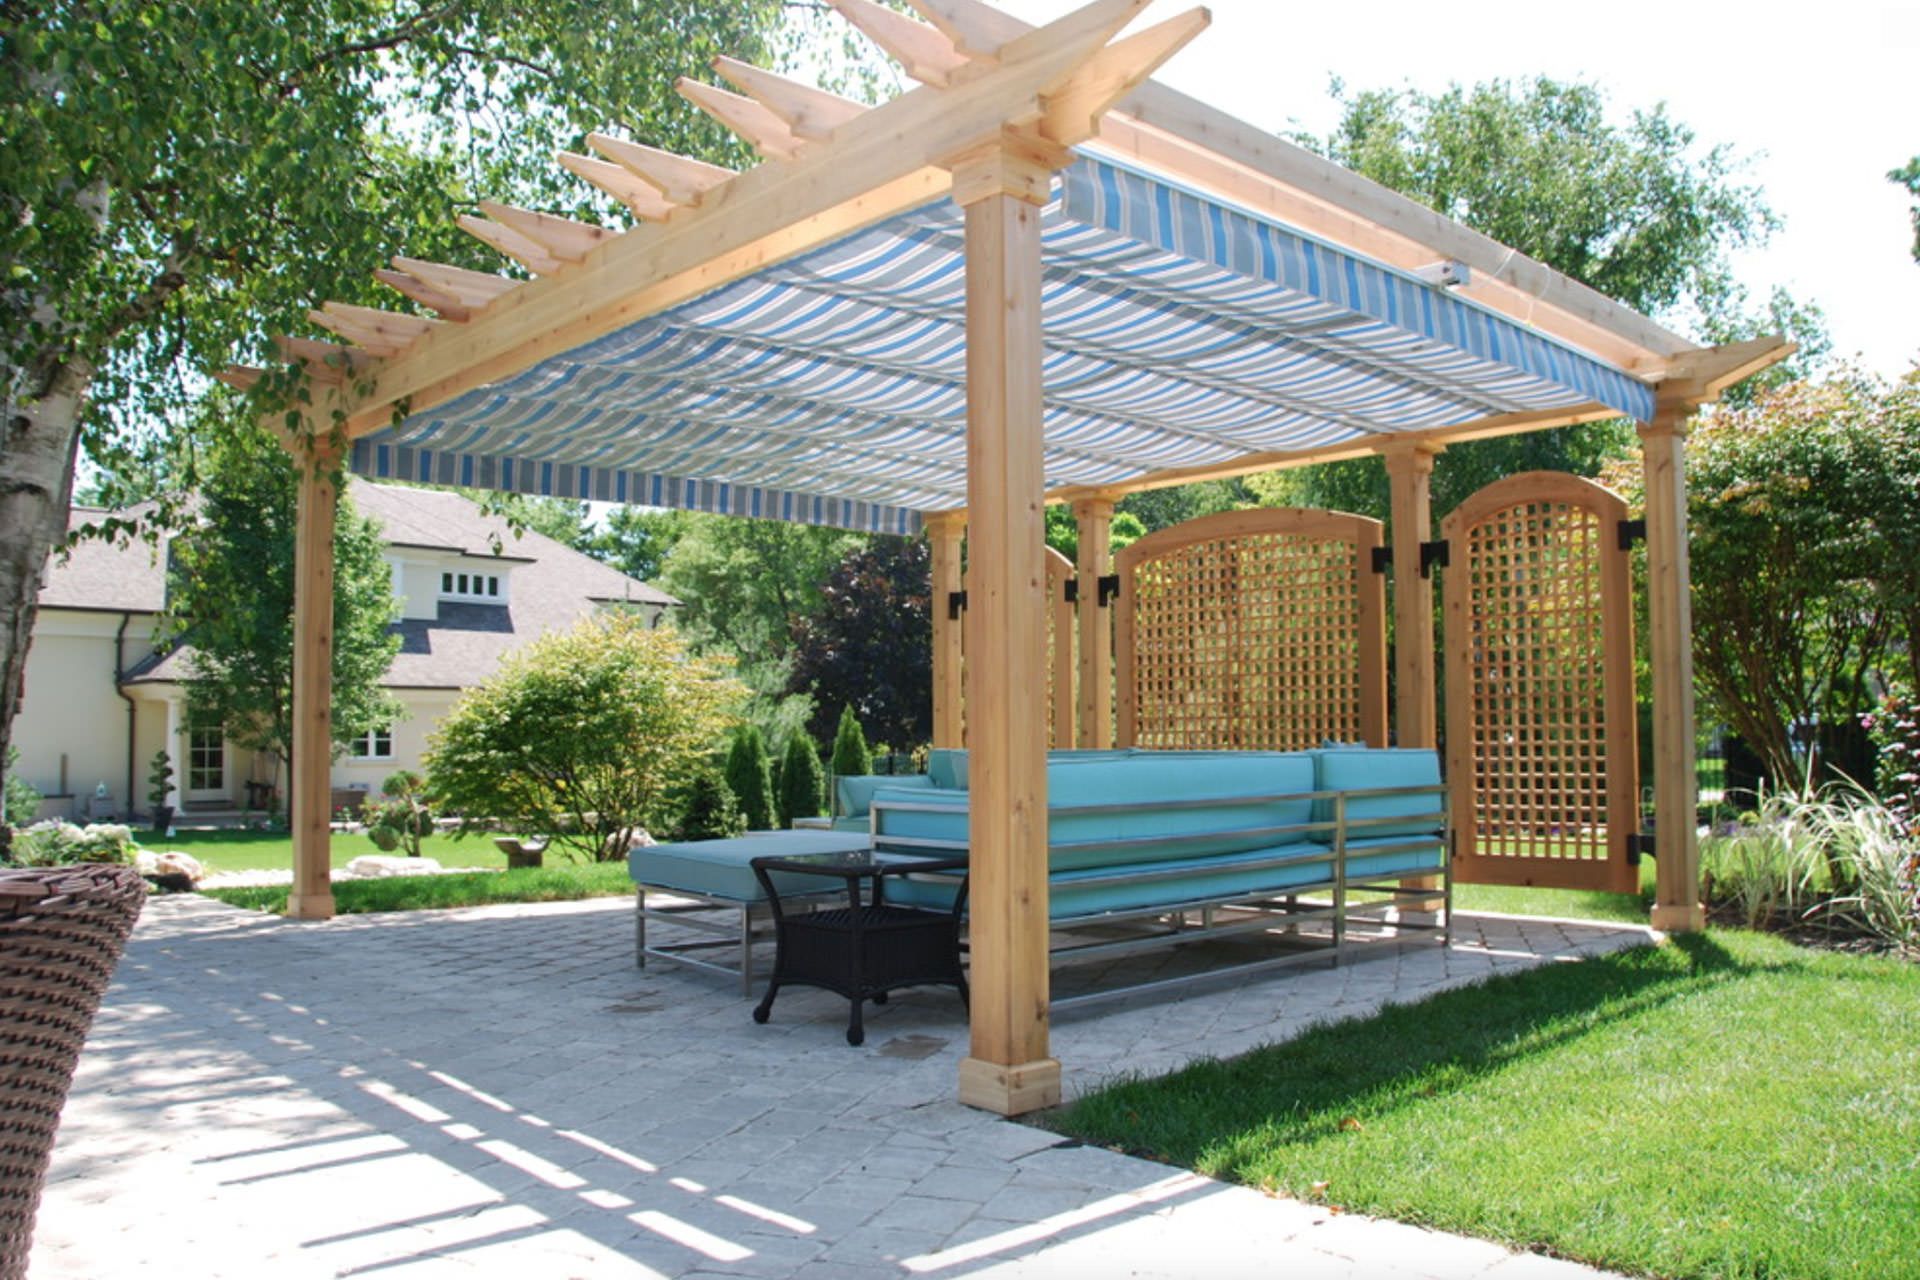 retractable awning canopy difference pergola canopies arbor trellis awnings cover vs canvas between building irregular shape custom shadefxcanopies march